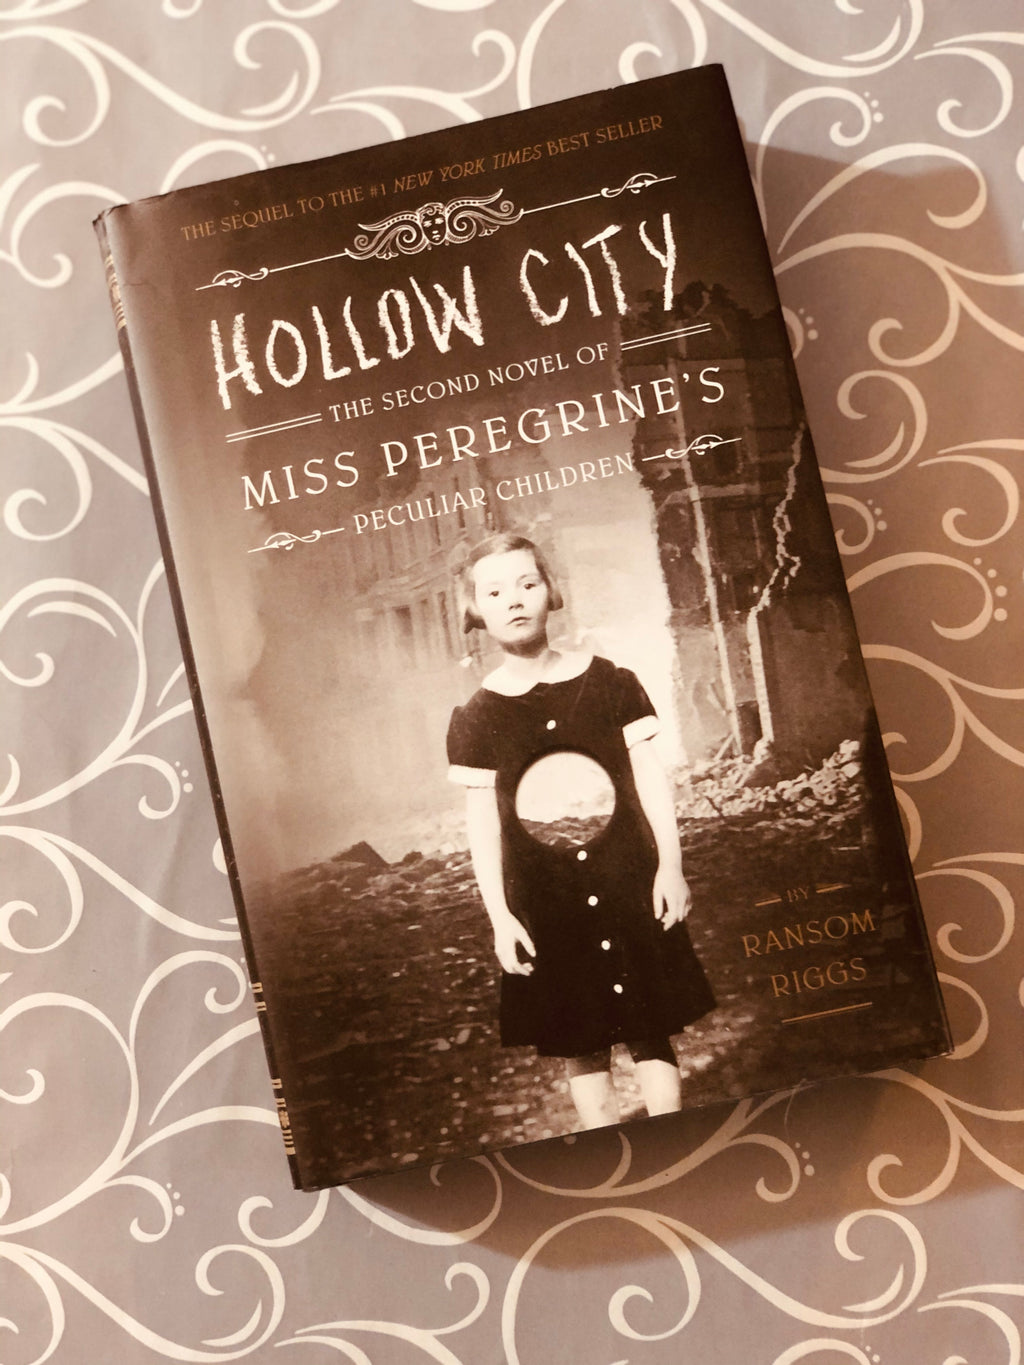 Hollow City: The 2nd Novel of Miss Peregrine's Peculiar Children- By Ransom Riggs